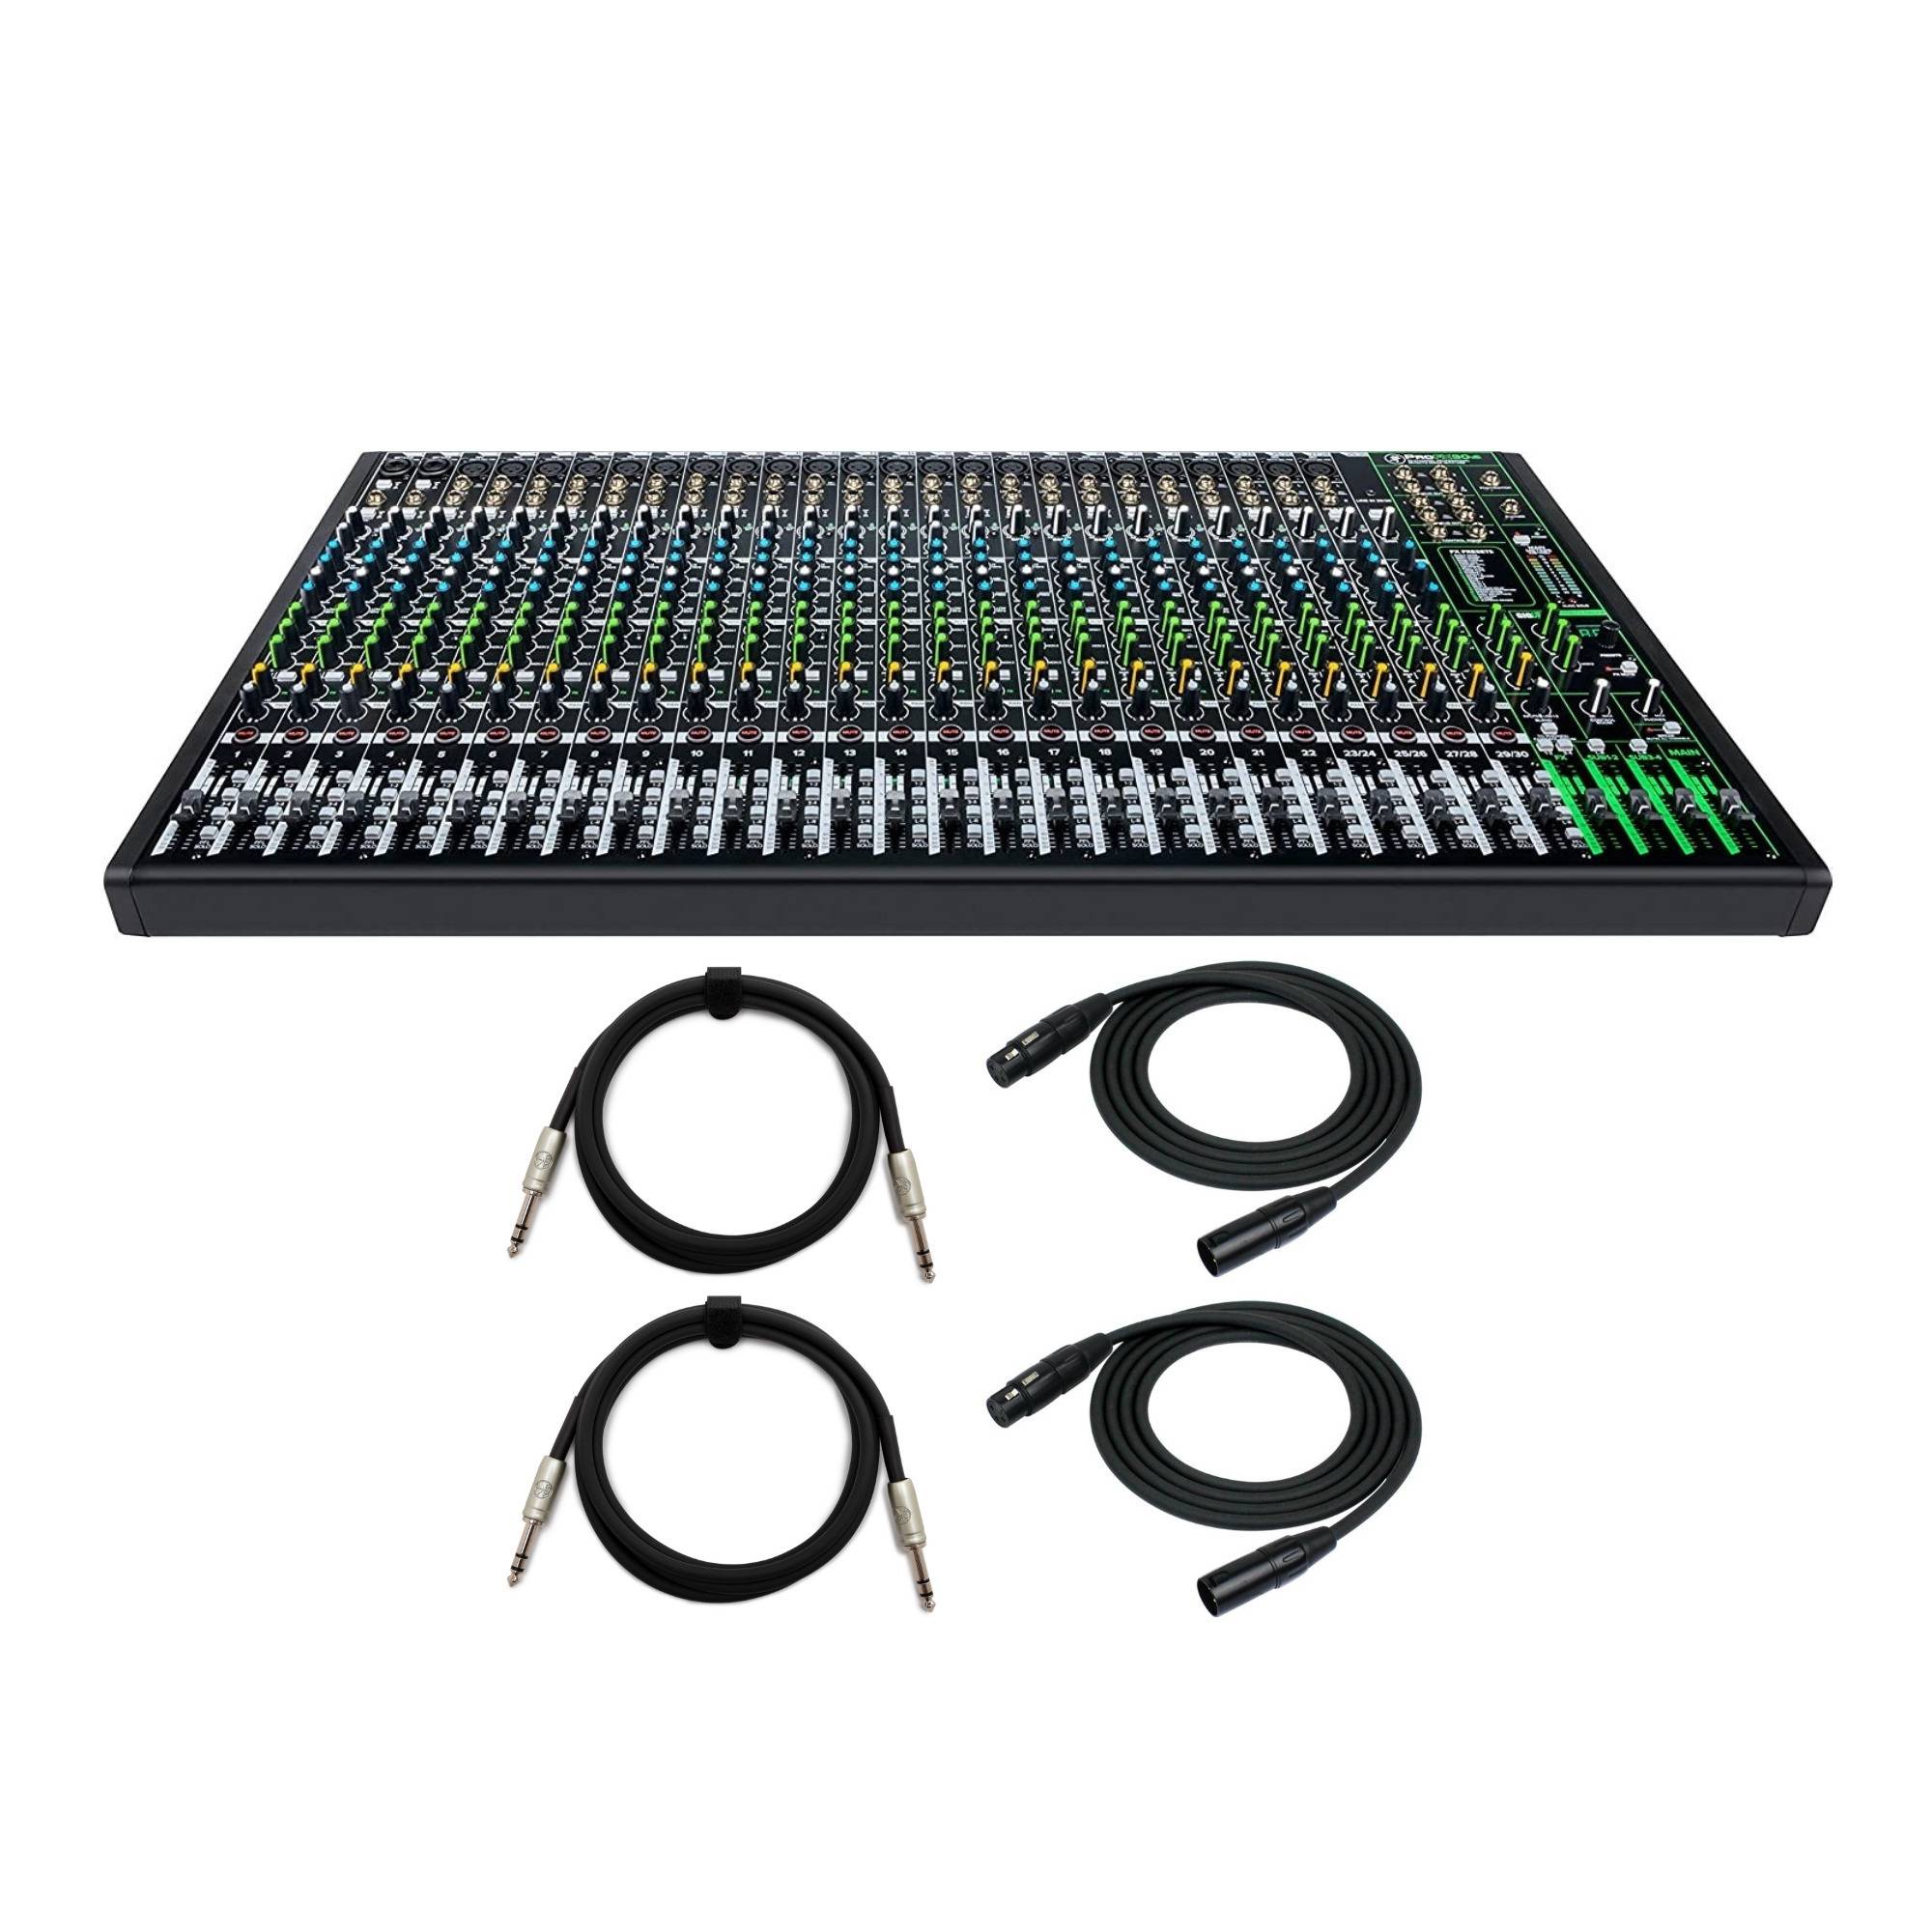 Mackie ProFX30v3 30-Channel Professional USB Mixer with 2x25 XLR Cables and 2x6 1/4 TRS Cables